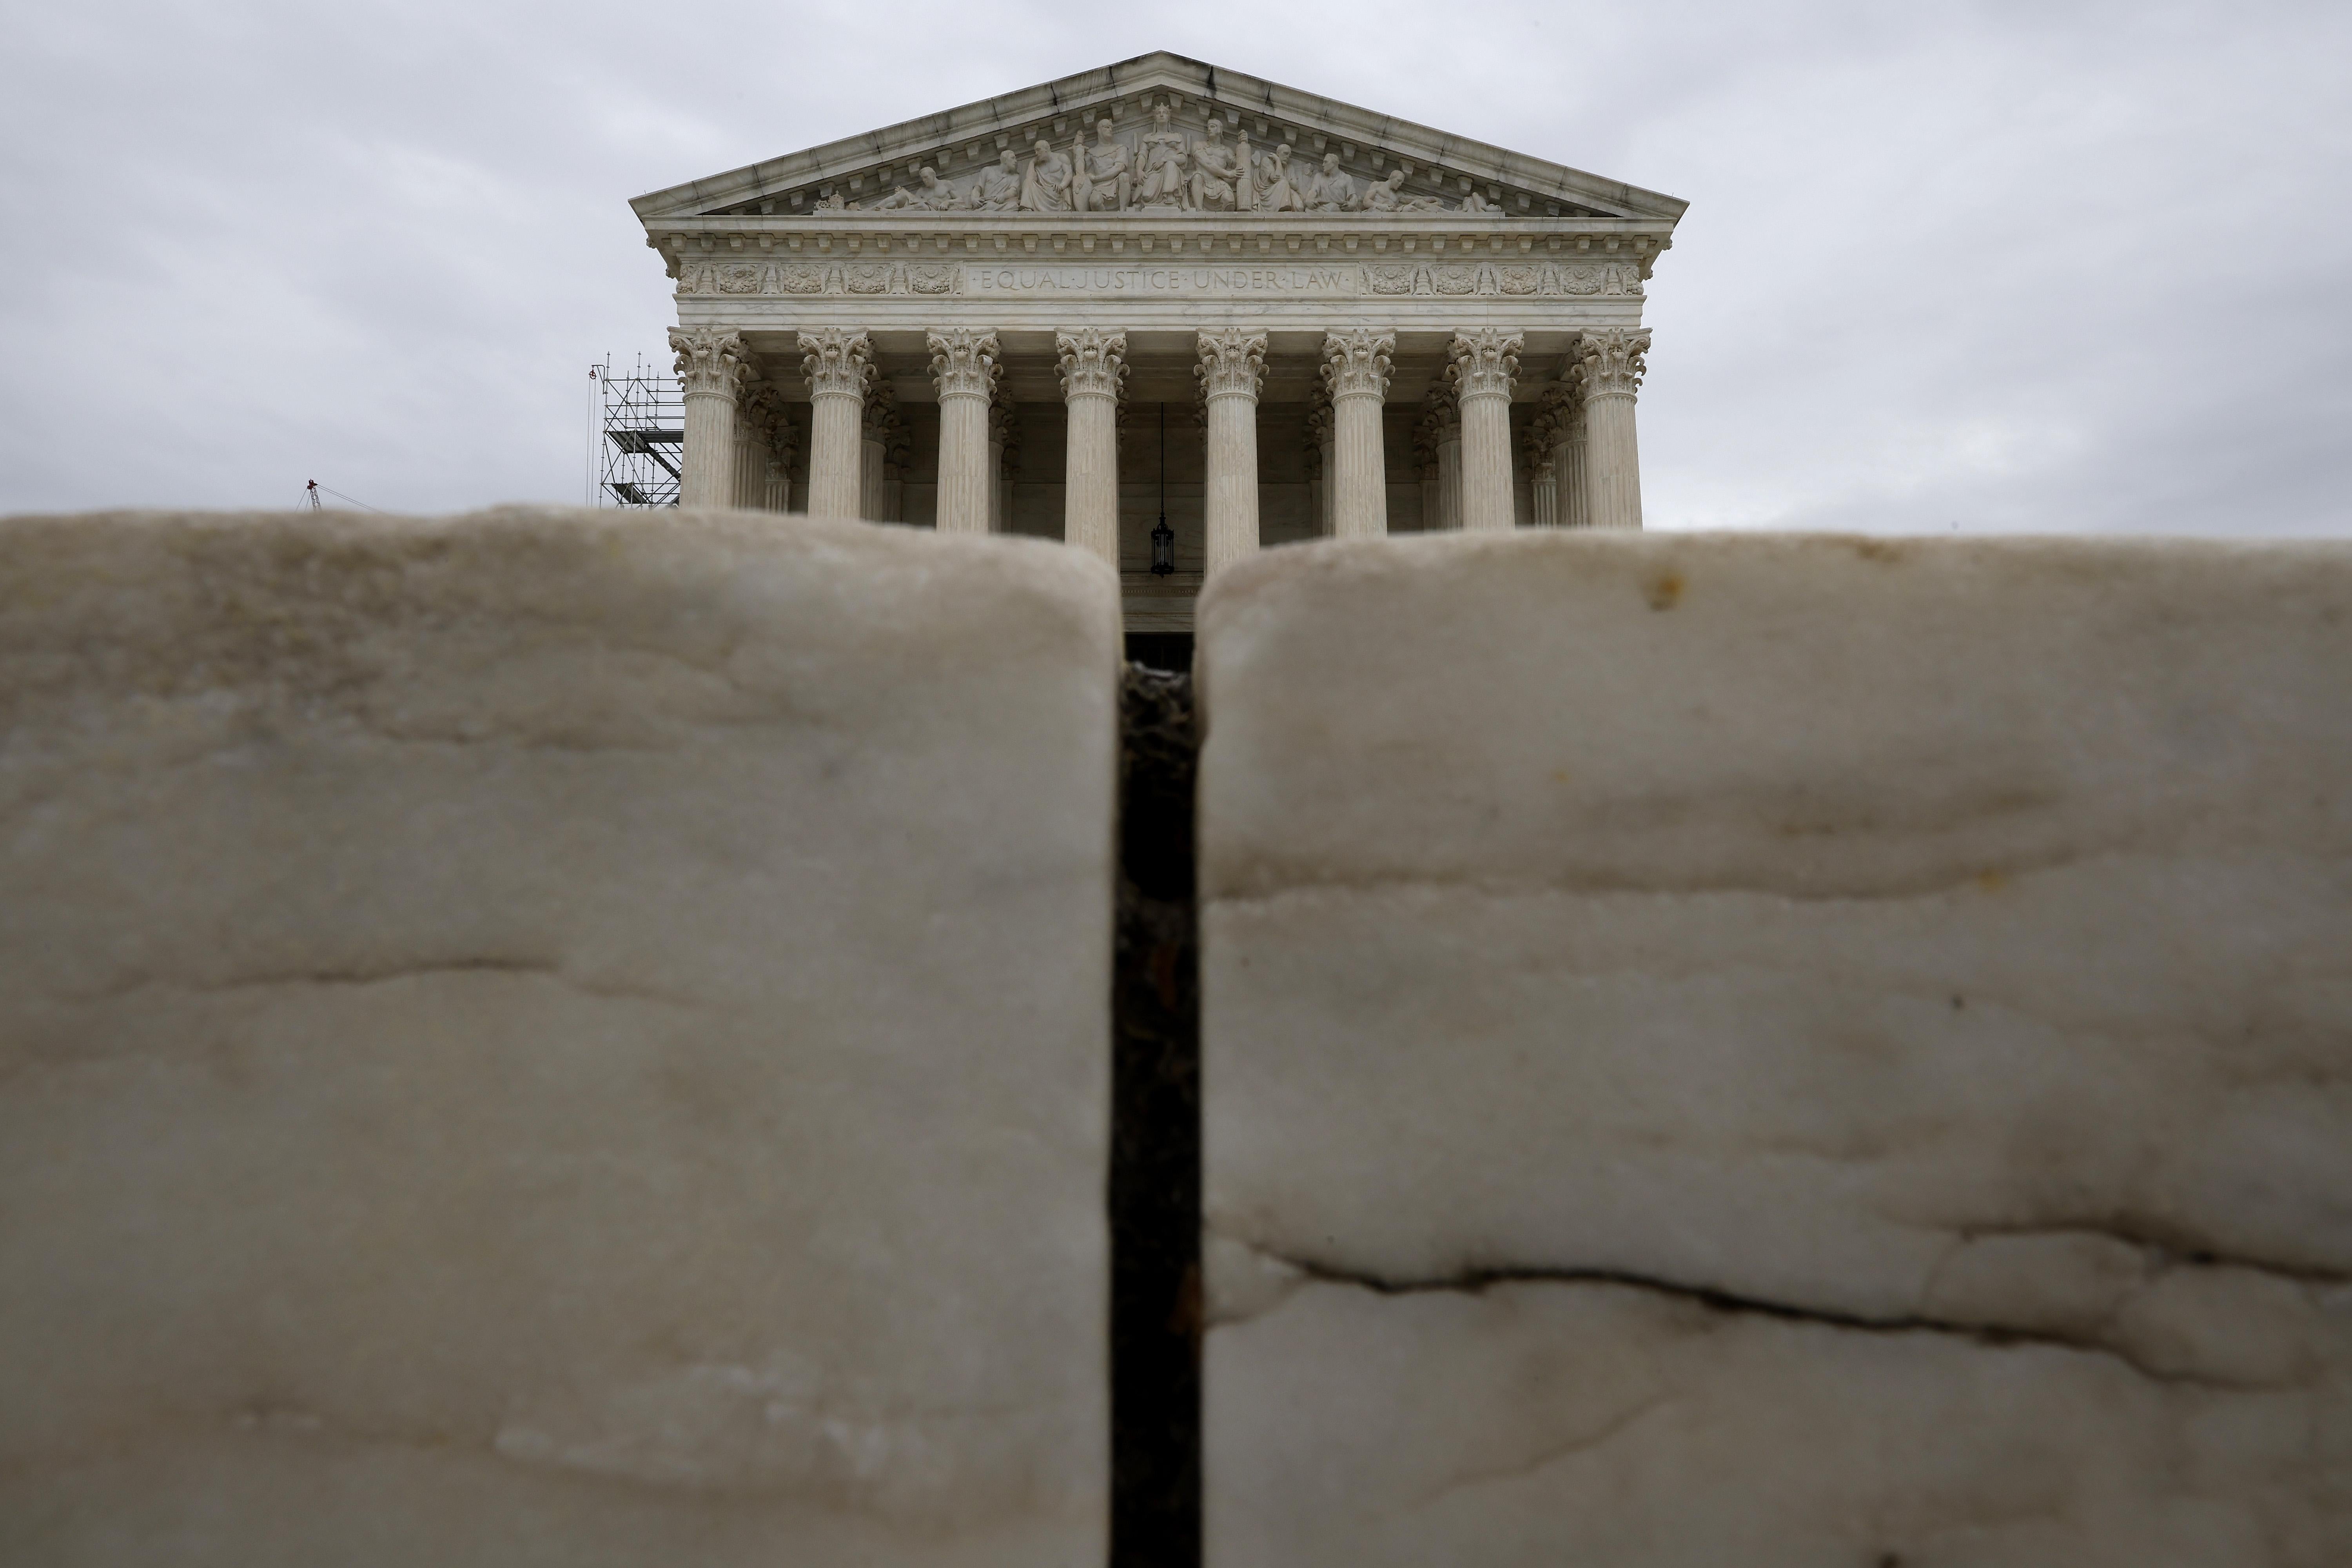 The U.S. Supreme Court rises above the marble steps leading to the court building. The building is mostly obscured.